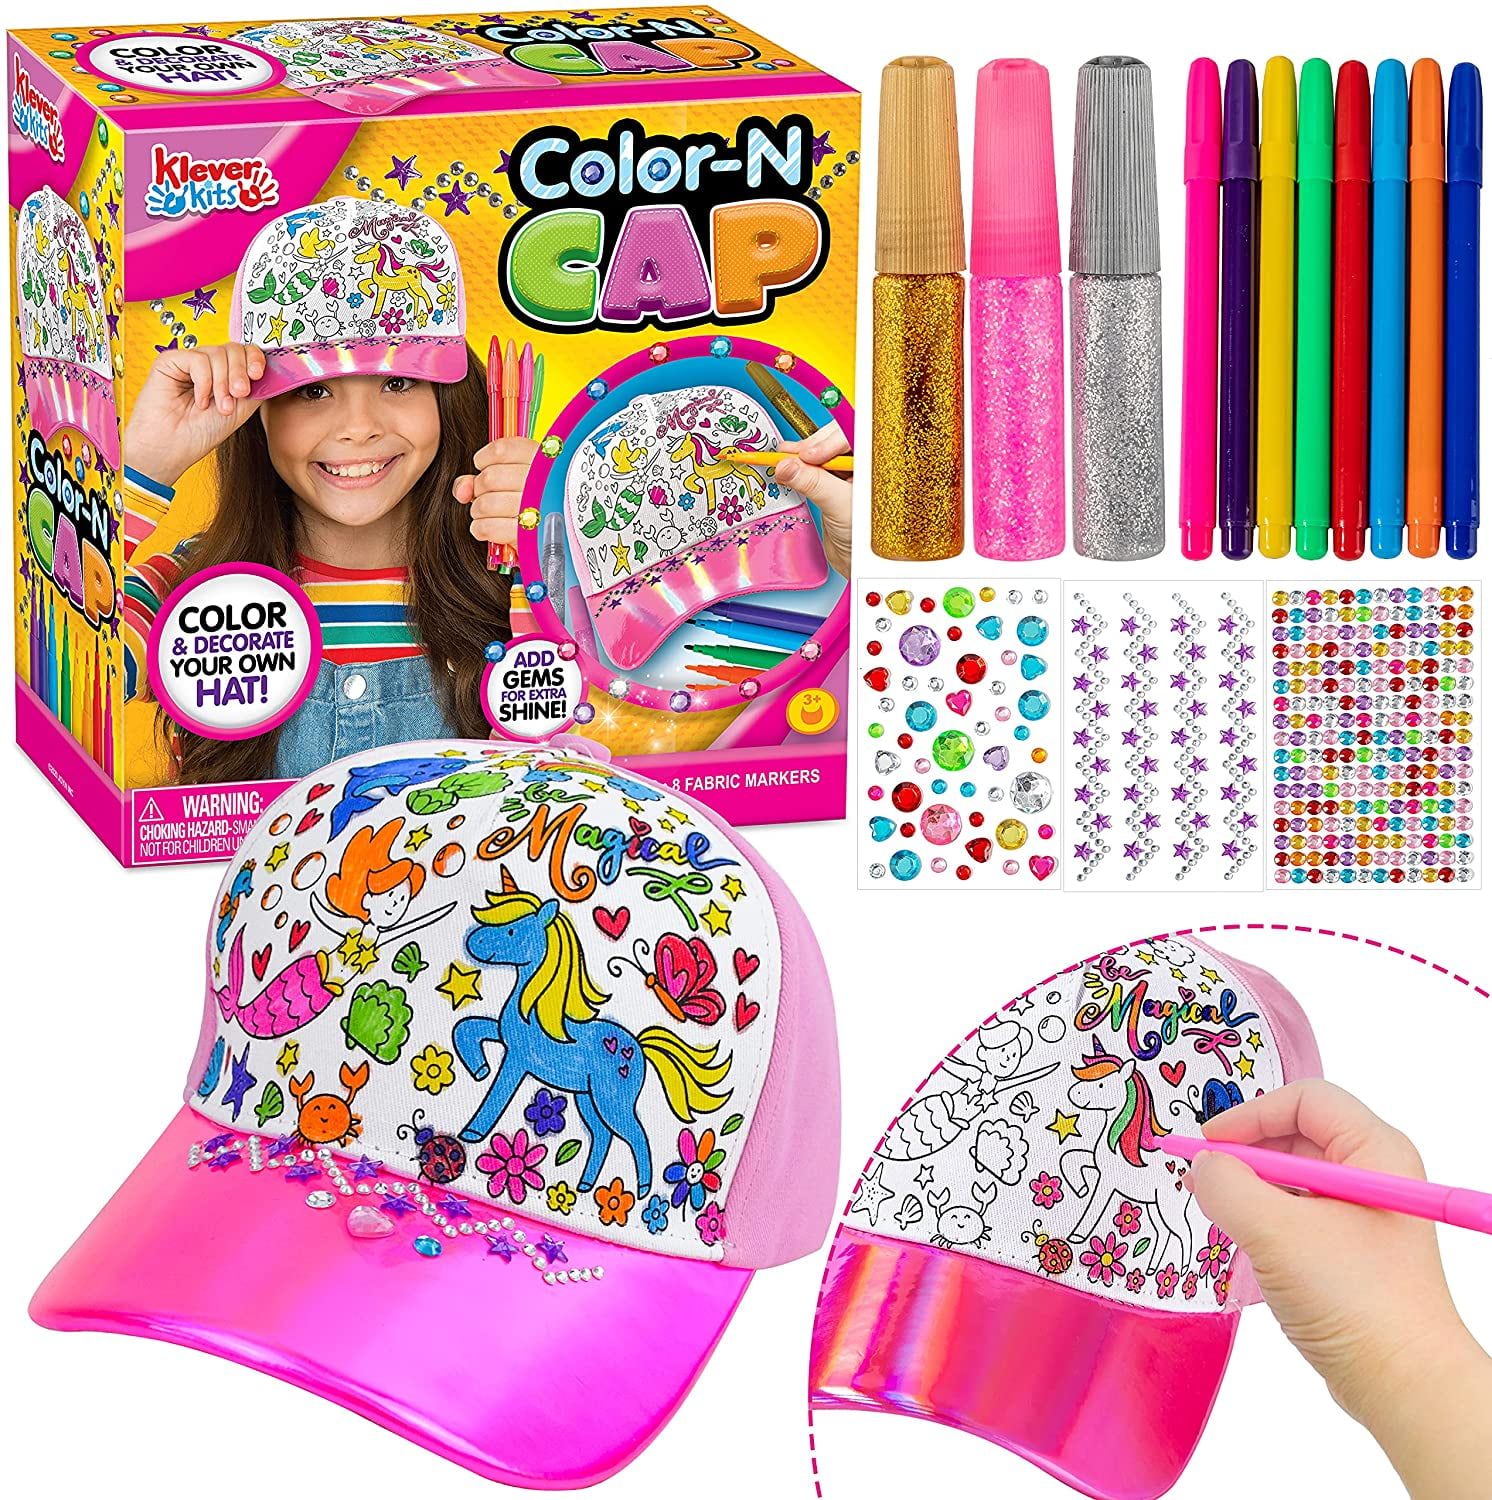 Gifts for Girls Decorate Your Own Baseball Cap with Unicorns Gems Stickers,  Arts and Crafts for Kids ages 4-12, Fun Creative DIY Arts & Crafts for